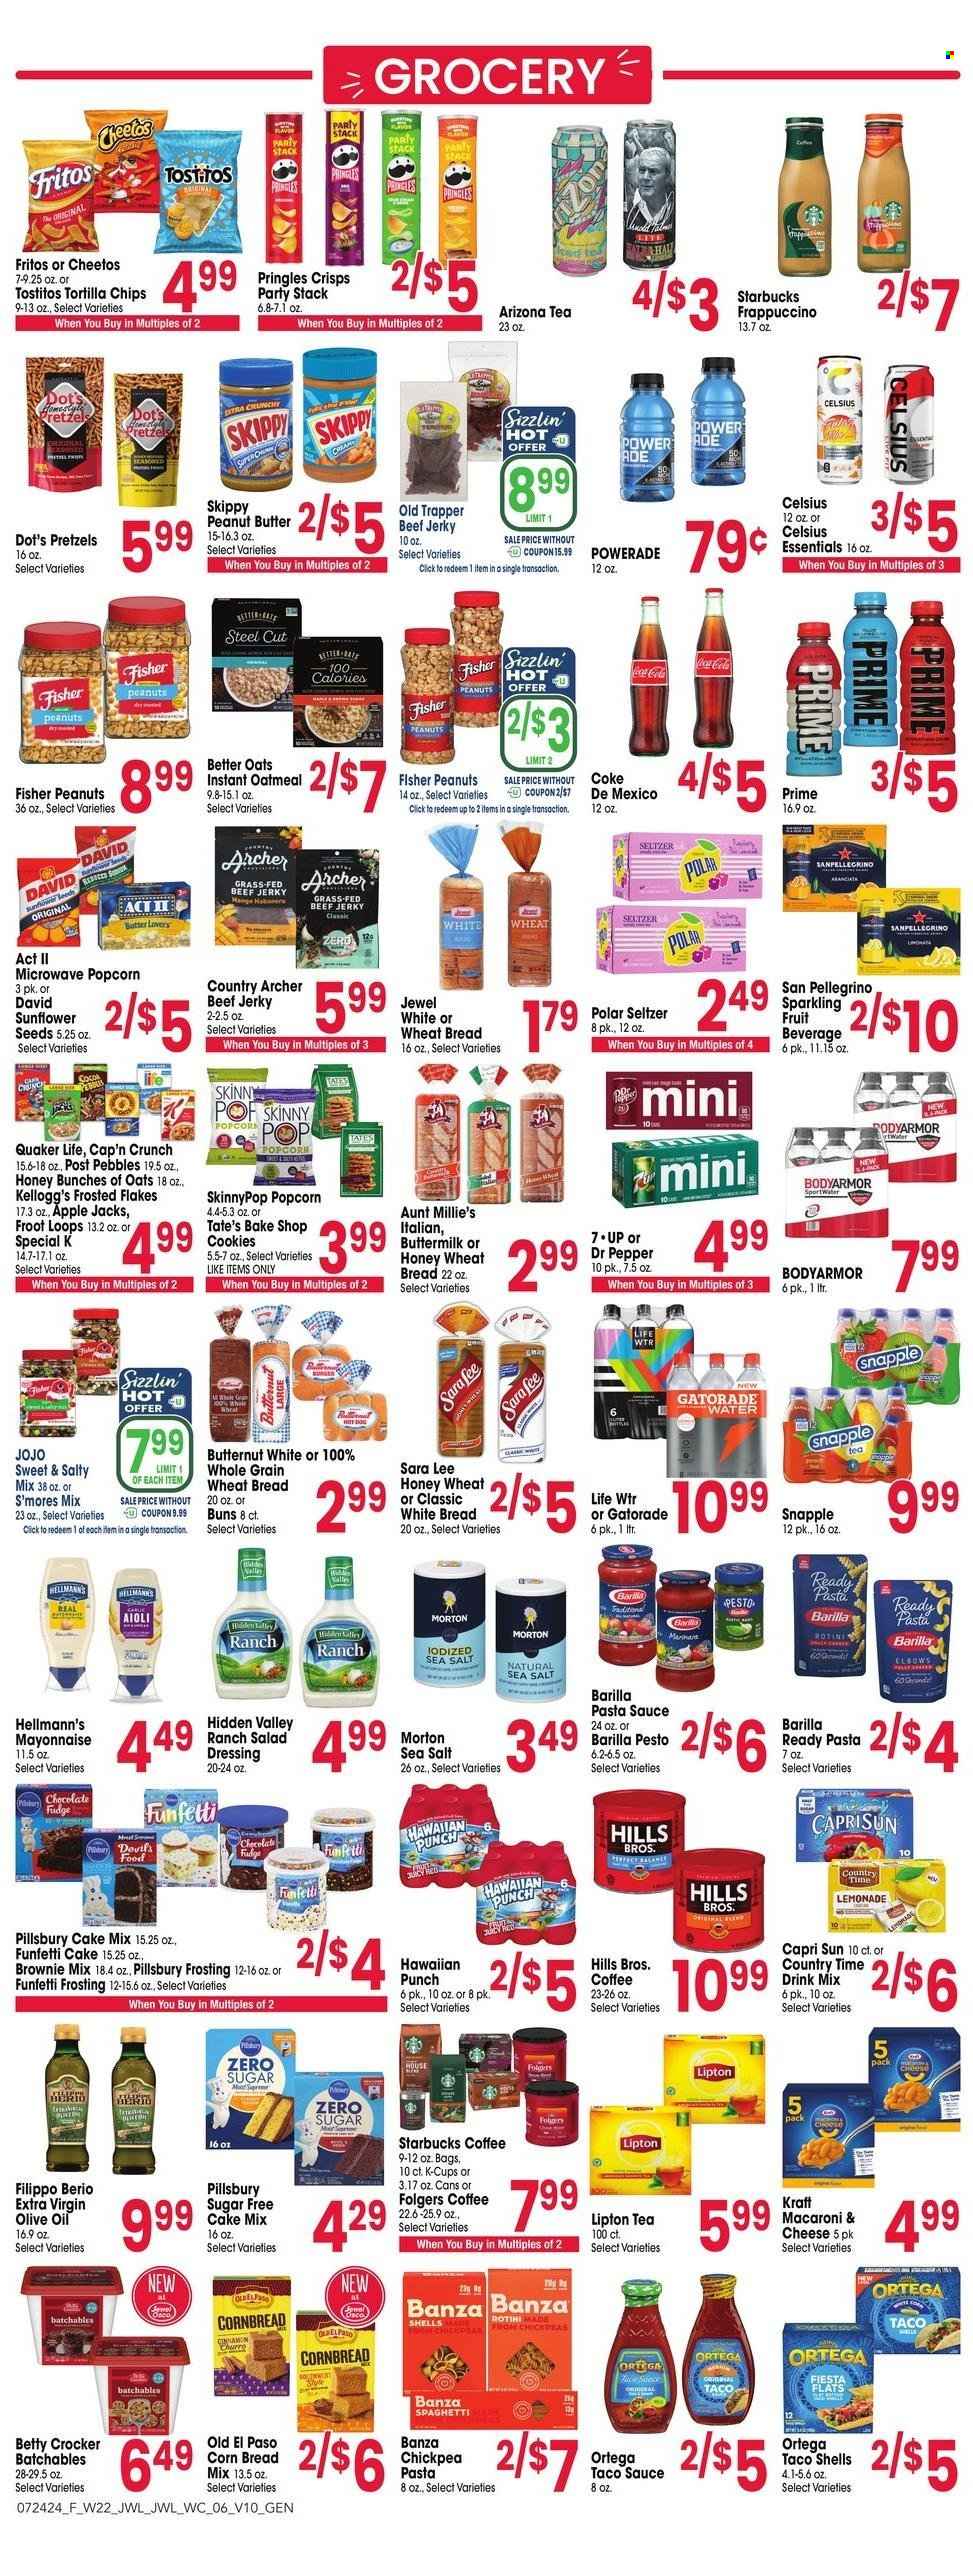 thumbnail - Jewel Osco Flyer - 07/24/2024 - 07/30/2024 - Sales products - bread, wheat bread, white bread, pretzels, corn bread, buns, Old El Paso, tacos, Sara Lee, brownie mix, cake mix, butternut squash, macaroni & cheese, spaghetti, hot dog, pasta sauce, Pillsbury, Barilla, Quaker, Kraft®, spaghetti sauce, ready meal, beef jerky, jerky, mayonnaise, Hellmann’s, cookies, Kellogg's, Fritos, tortilla chips, Pringles, Cheetos, popcorn, Tostitos, Skinny Pop, salty snack, crisps, cocoa, frosting, oatmeal, baking mix, cereals, Cap'n Crunch, Frosted Flakes, chickpeas, salad dressing, taco sauce, pesto, dressing, extra virgin olive oil, olive oil, oil, peanut butter, sunflower seeds, Capri Sun, Coca-Cola, lemonade, Powerade, energy drink, Lipton, fruit drink, ice tea, Dr. Pepper, soft drink, AriZona, Snapple, Country Time, Gatorade, Coke, electrolyte drink, seltzer water, sparkling water, San Pellegrino, water, carbonated soft drink, coffee drink, coffee, Starbucks, Folgers, coffee capsules, K-Cups, frappuccino, Hill's, JoJo. Page 6.